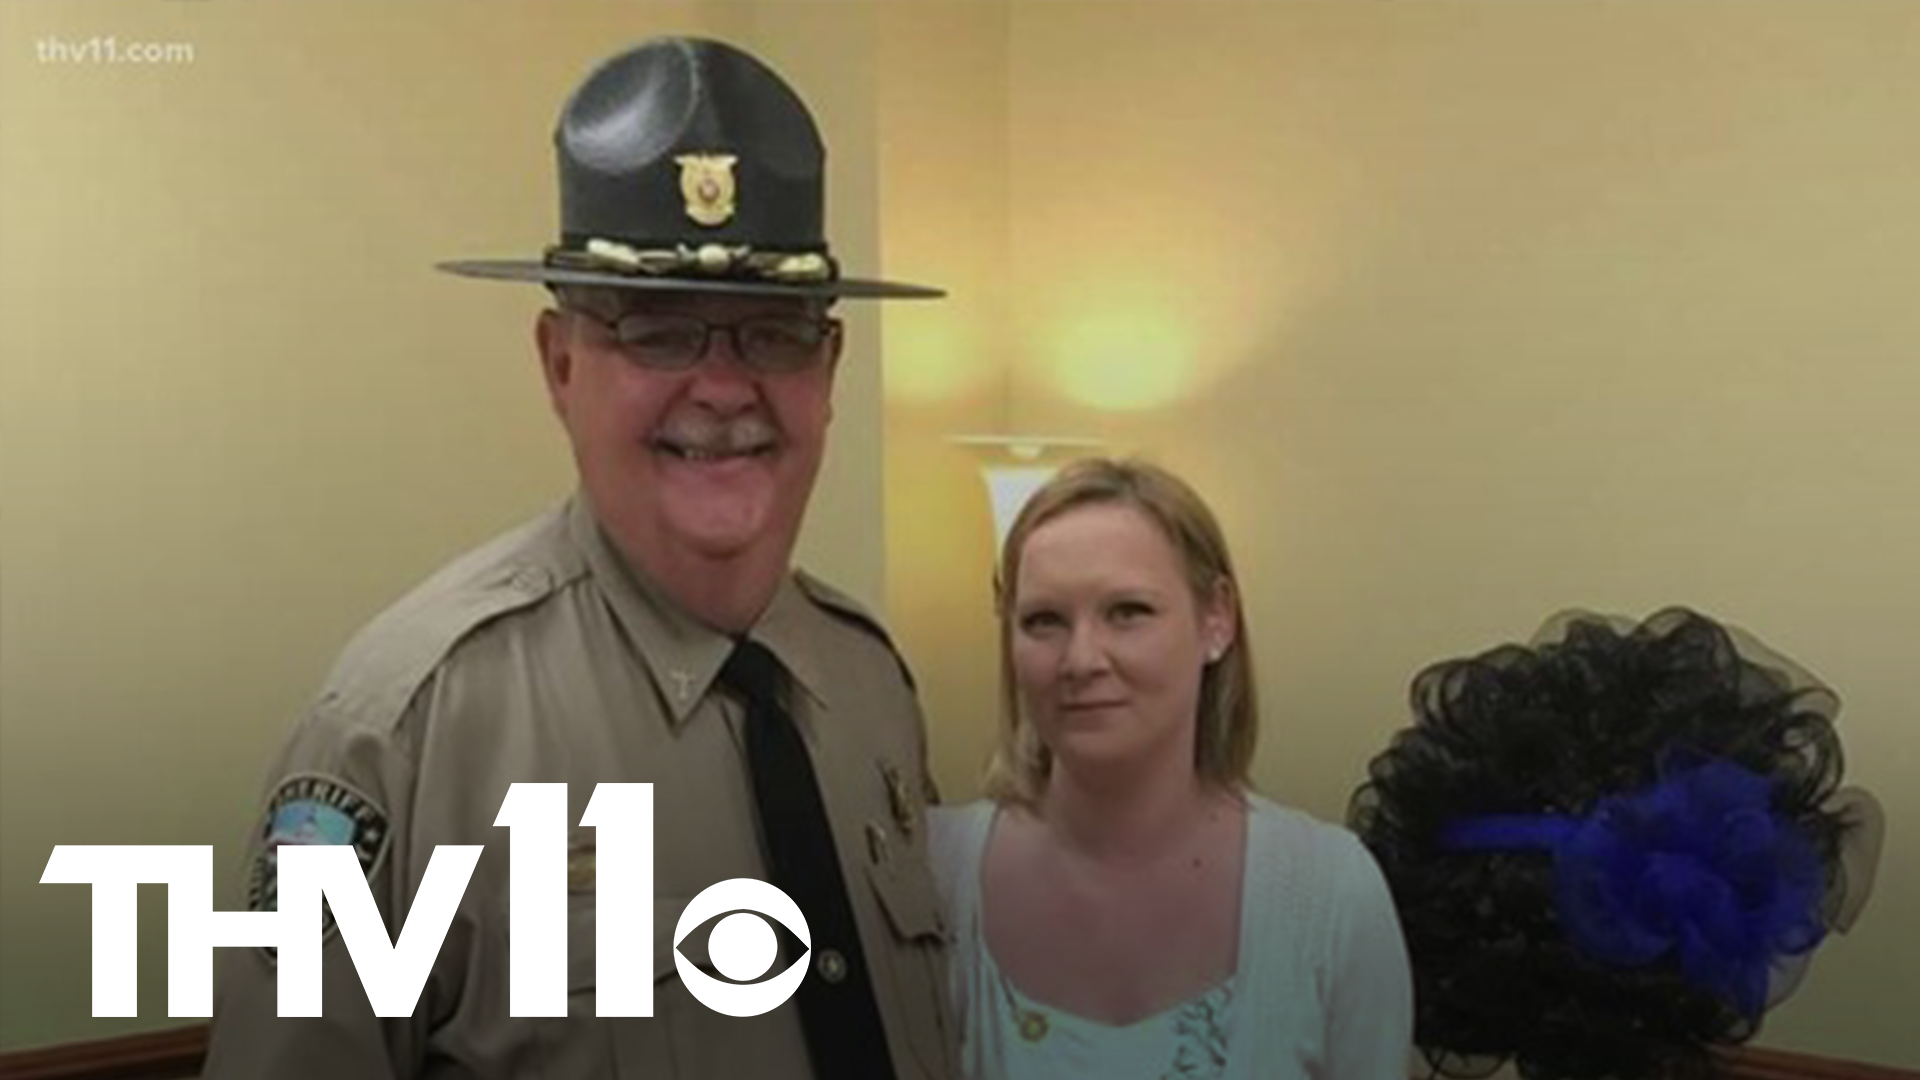 The chaplain of White County Sheriff's Office wears many hats. David Copeland would tell you he's just doing his job, but people who know him say otherwise.